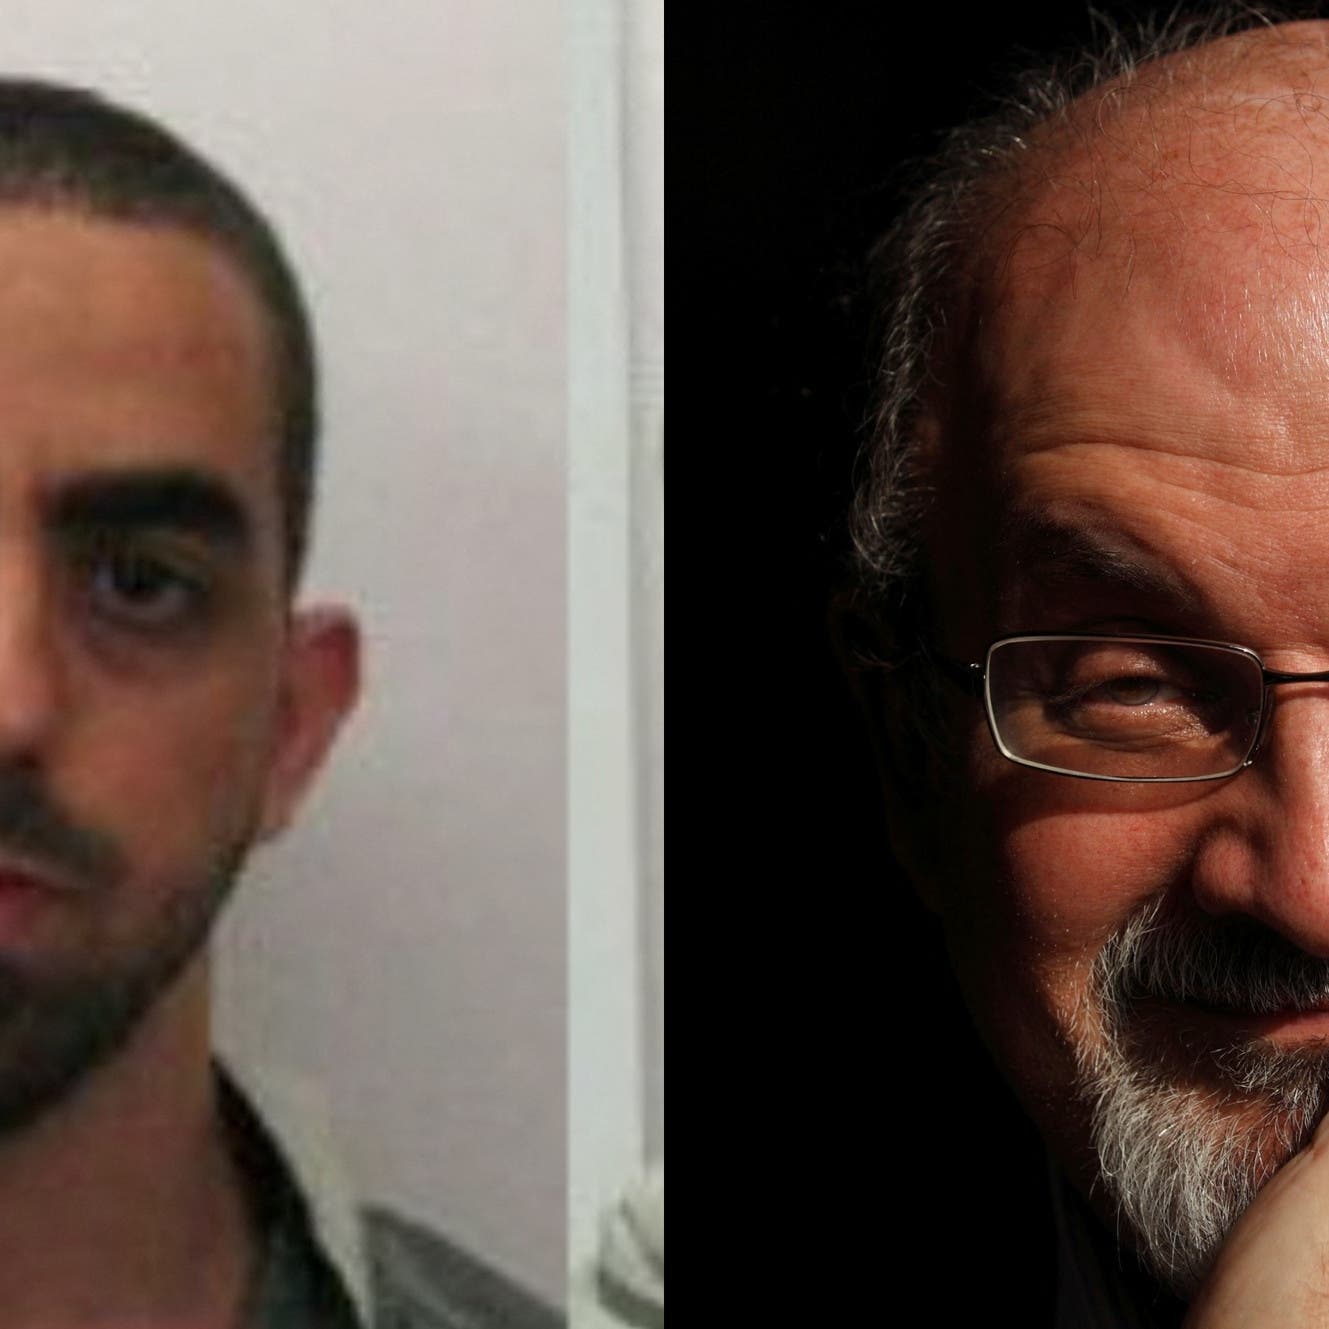 Rushdie attacker returned to US as ‘religious zealot’ after 2018 Lebanon trip: Mother